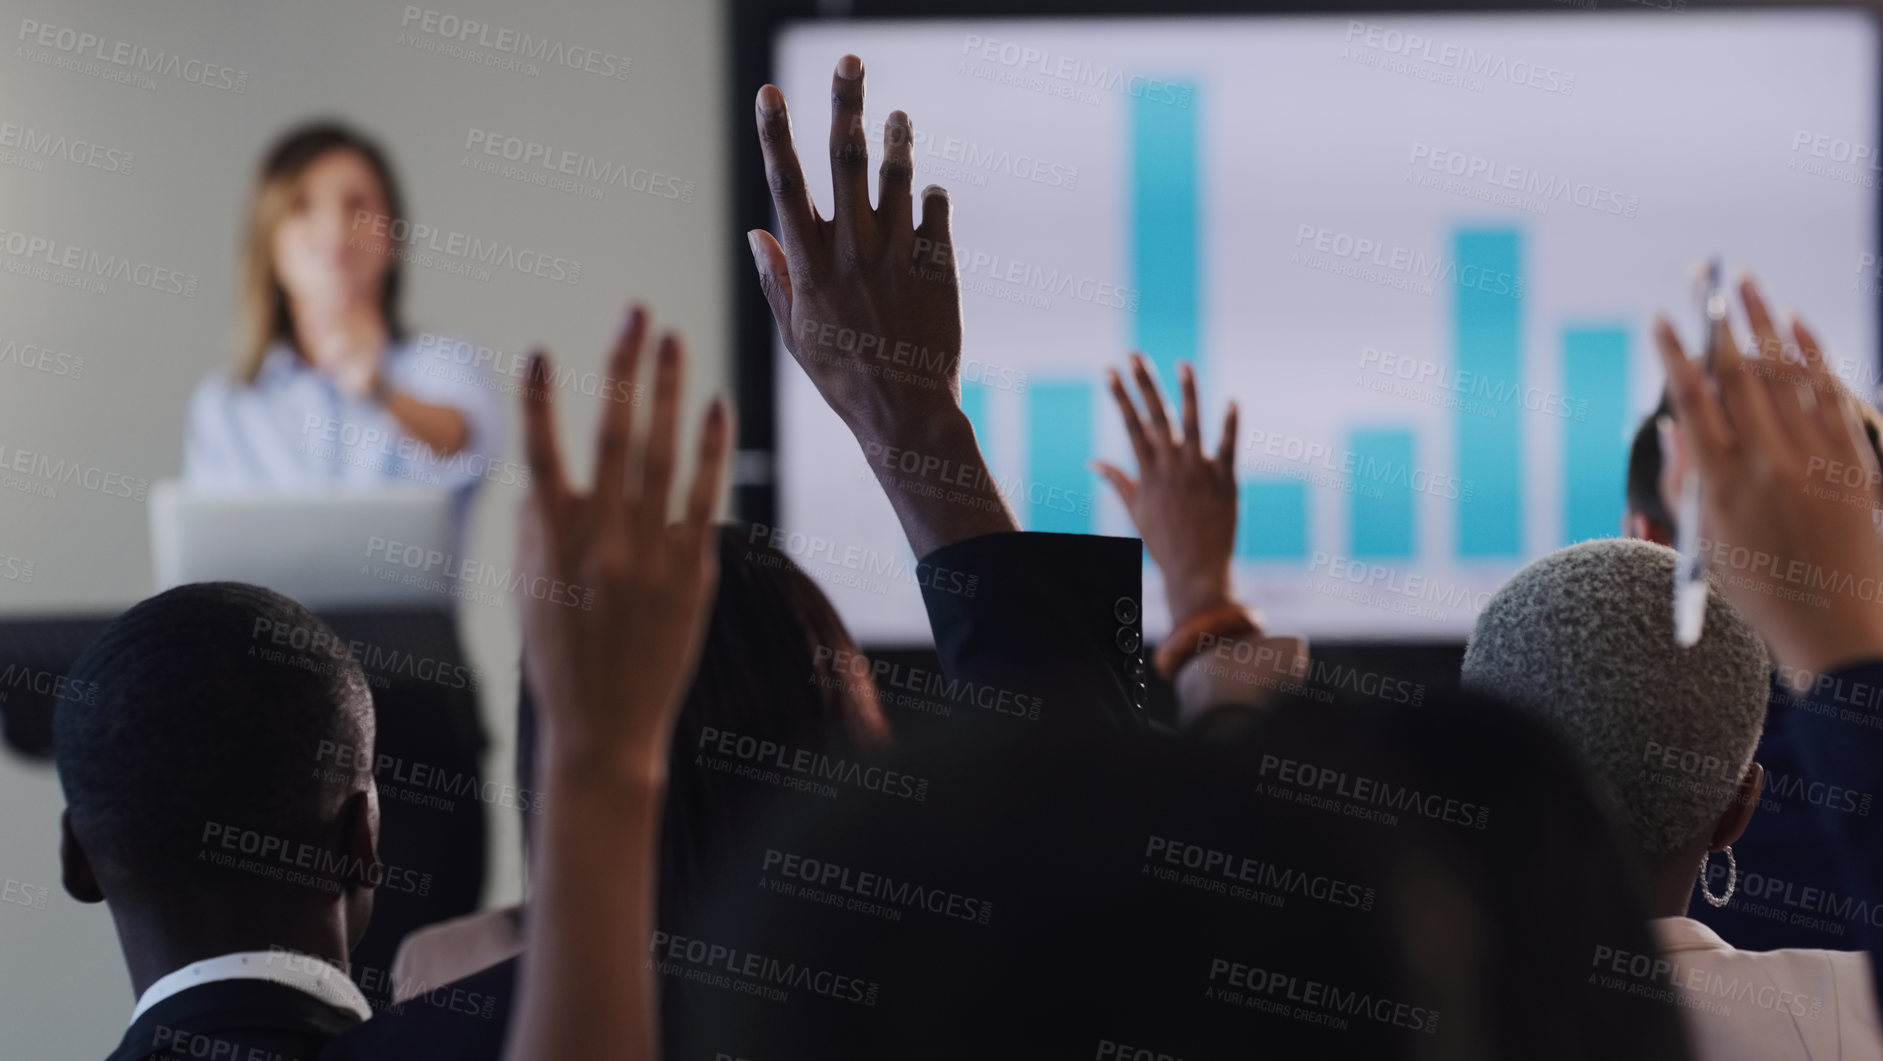 Buy stock photo Rearview shot of a group of businesspeople raising their hands during a conference in an office